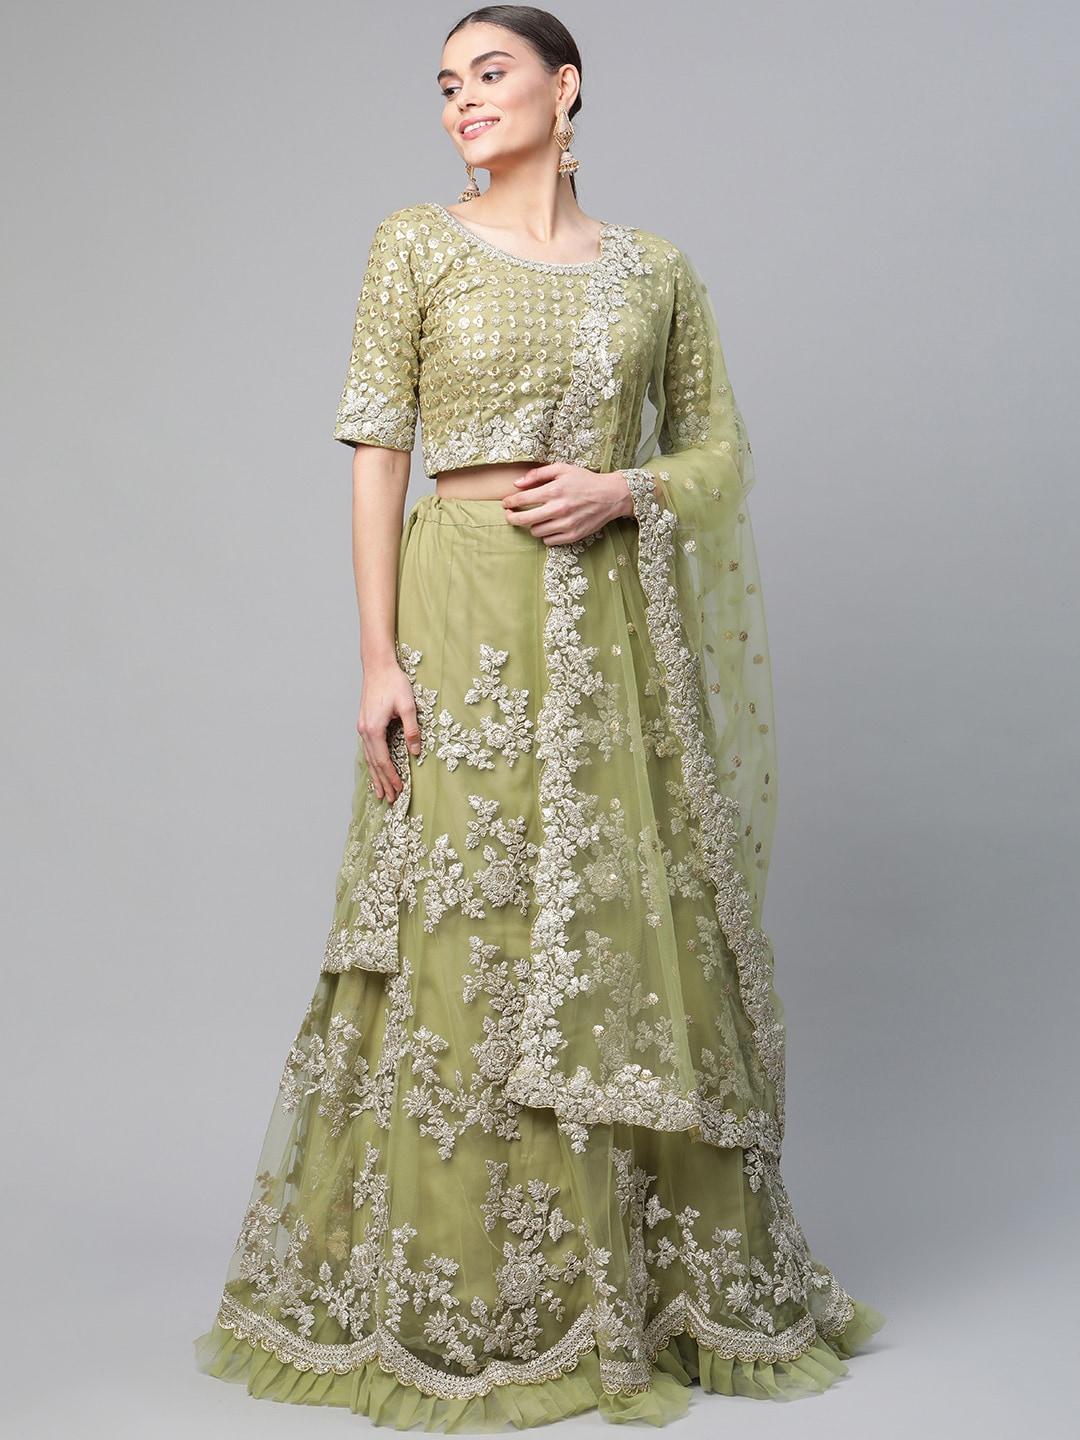 Readiprint Fashions Olive Green Embroidered Sequinned Semi-Stitched Lehenga & Unstitched Blouse With Dupatta